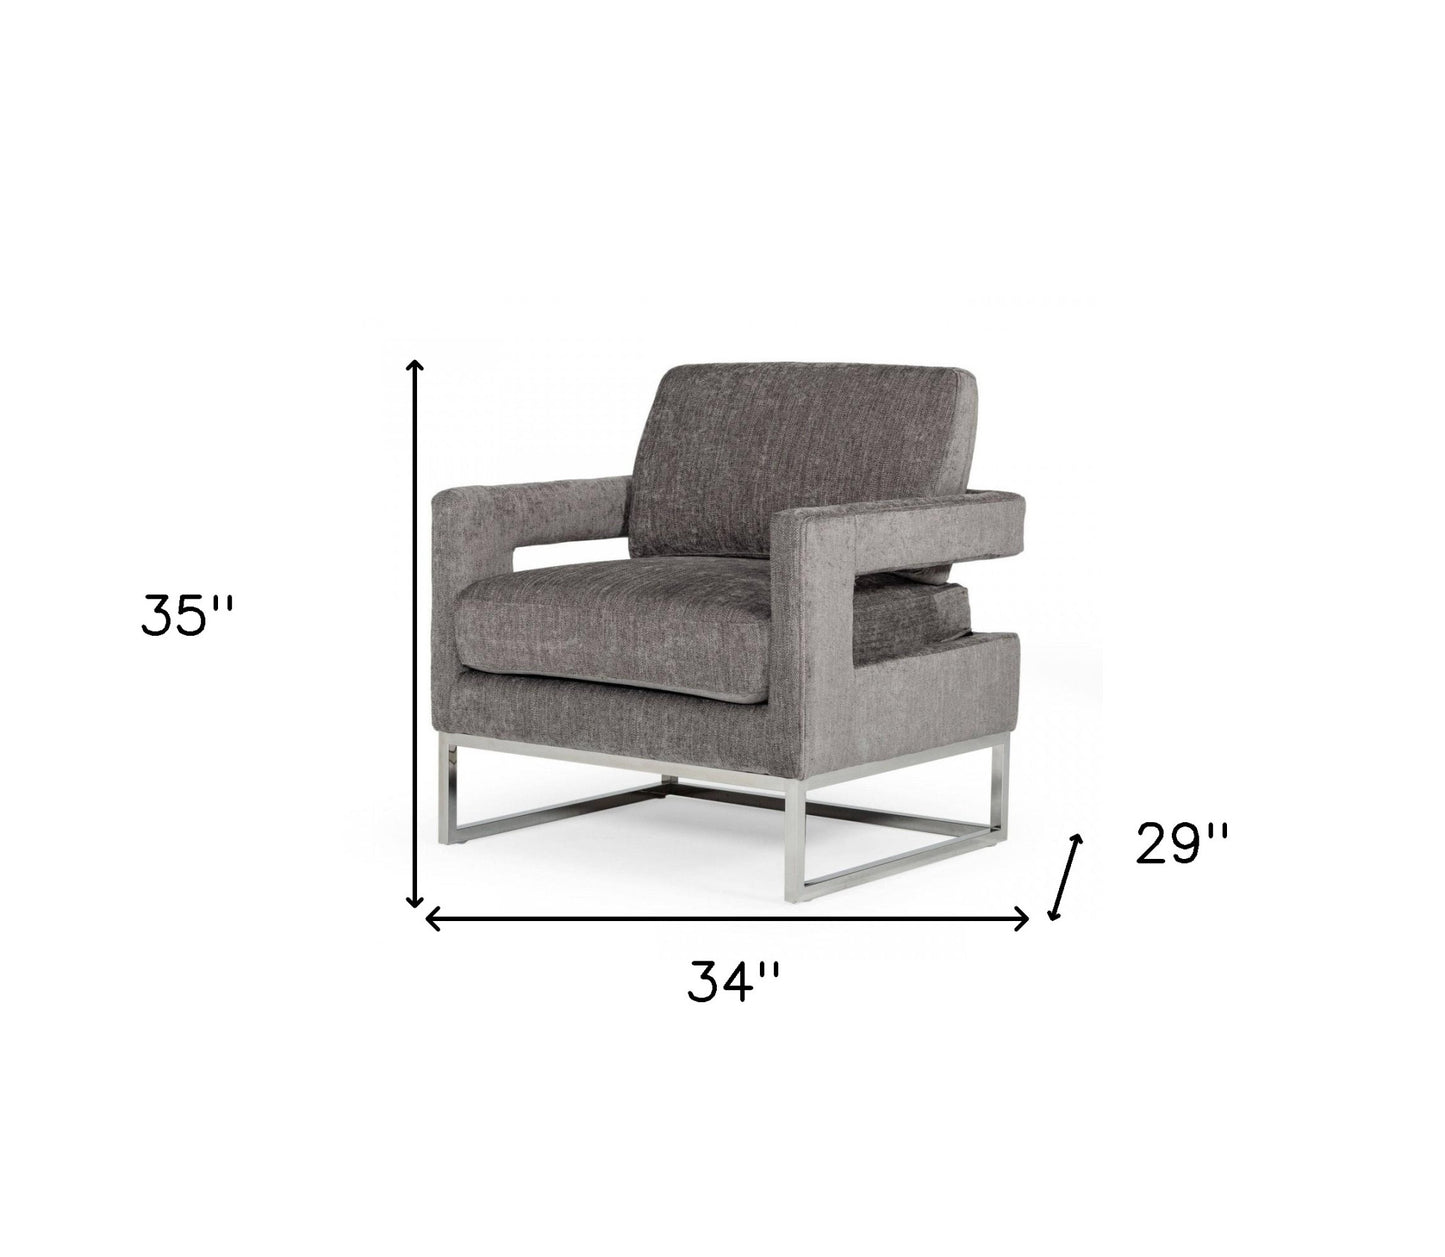 34" Dark Gray And Silver Fabric Arm Chair